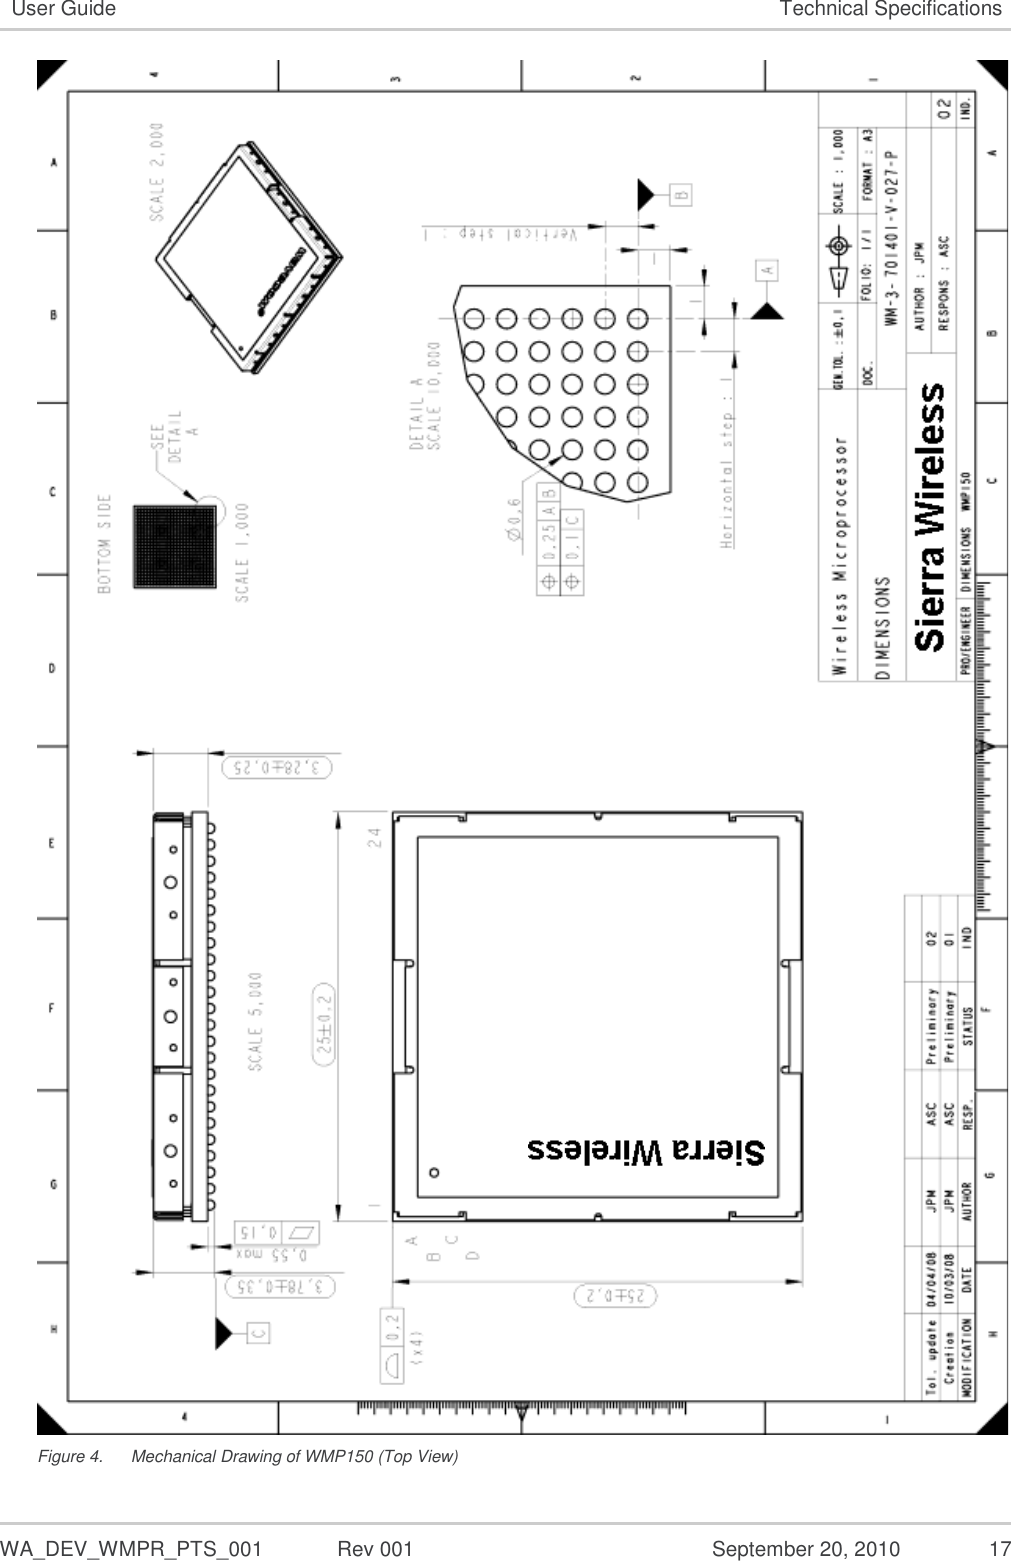   WA_DEV_WMPR_PTS_001  Rev 001  September 20, 2010  17 User Guide Technical Specifications  Figure 4.  Mechanical Drawing of WMP150 (Top View) 